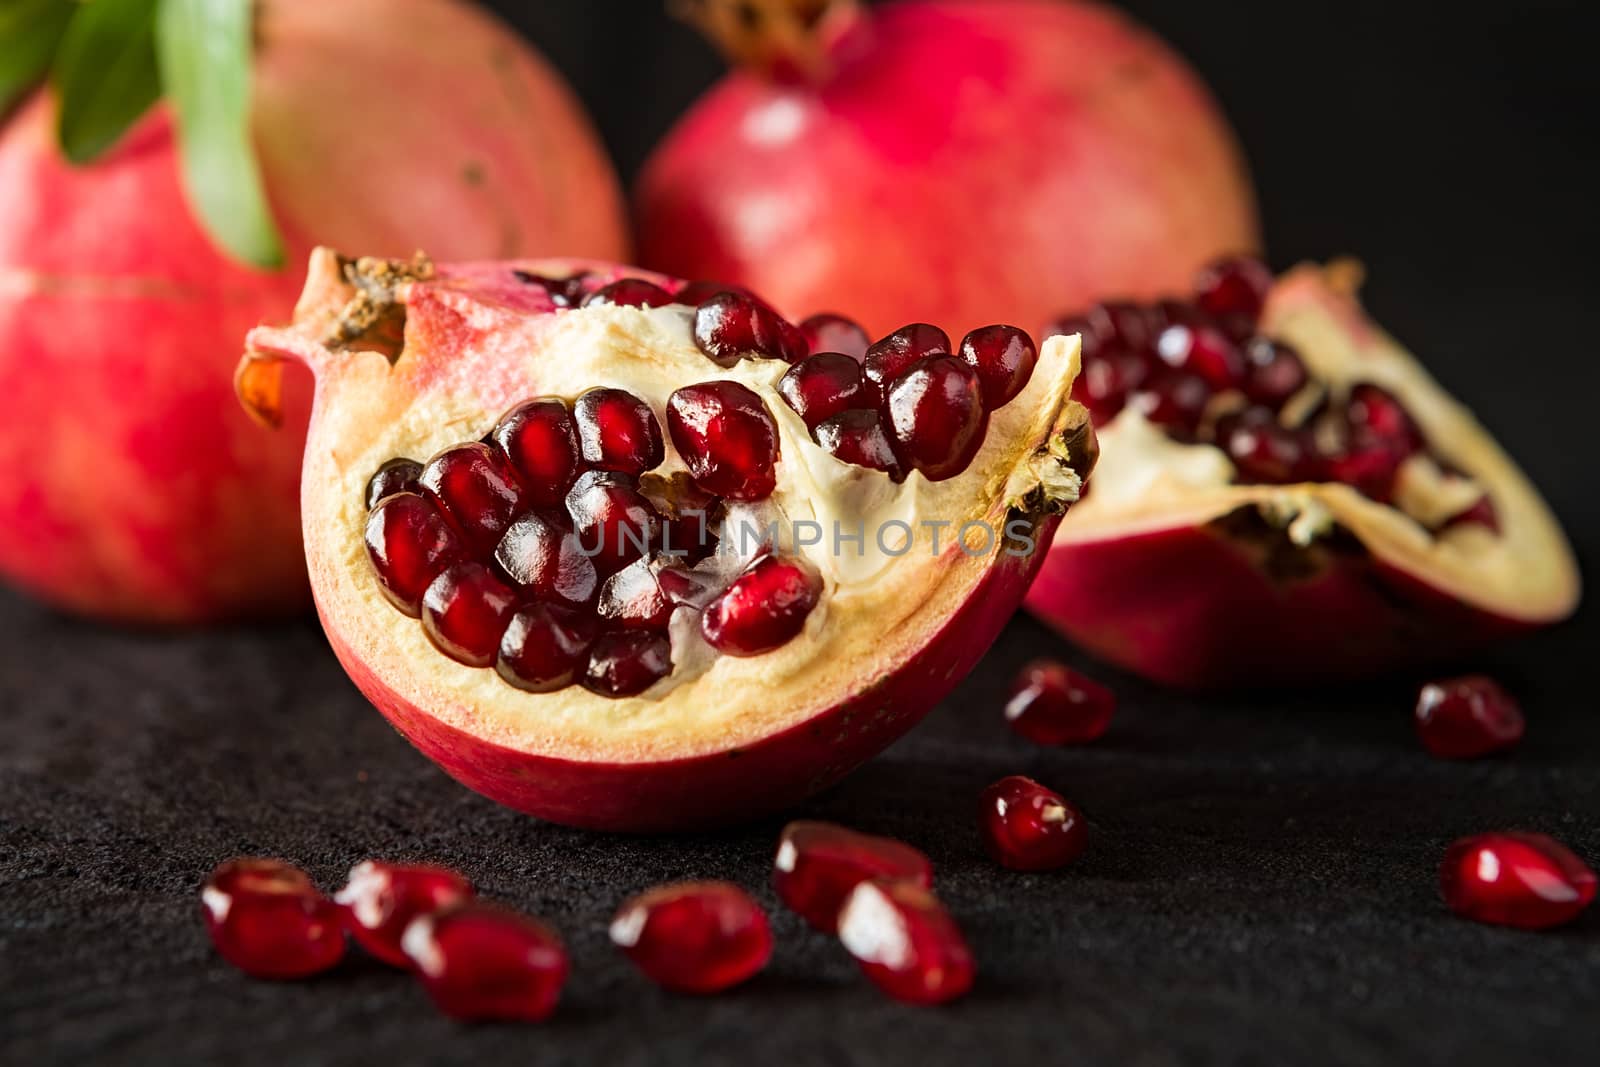 Closeup of half pomegranate fruit and seeds on a black textured background